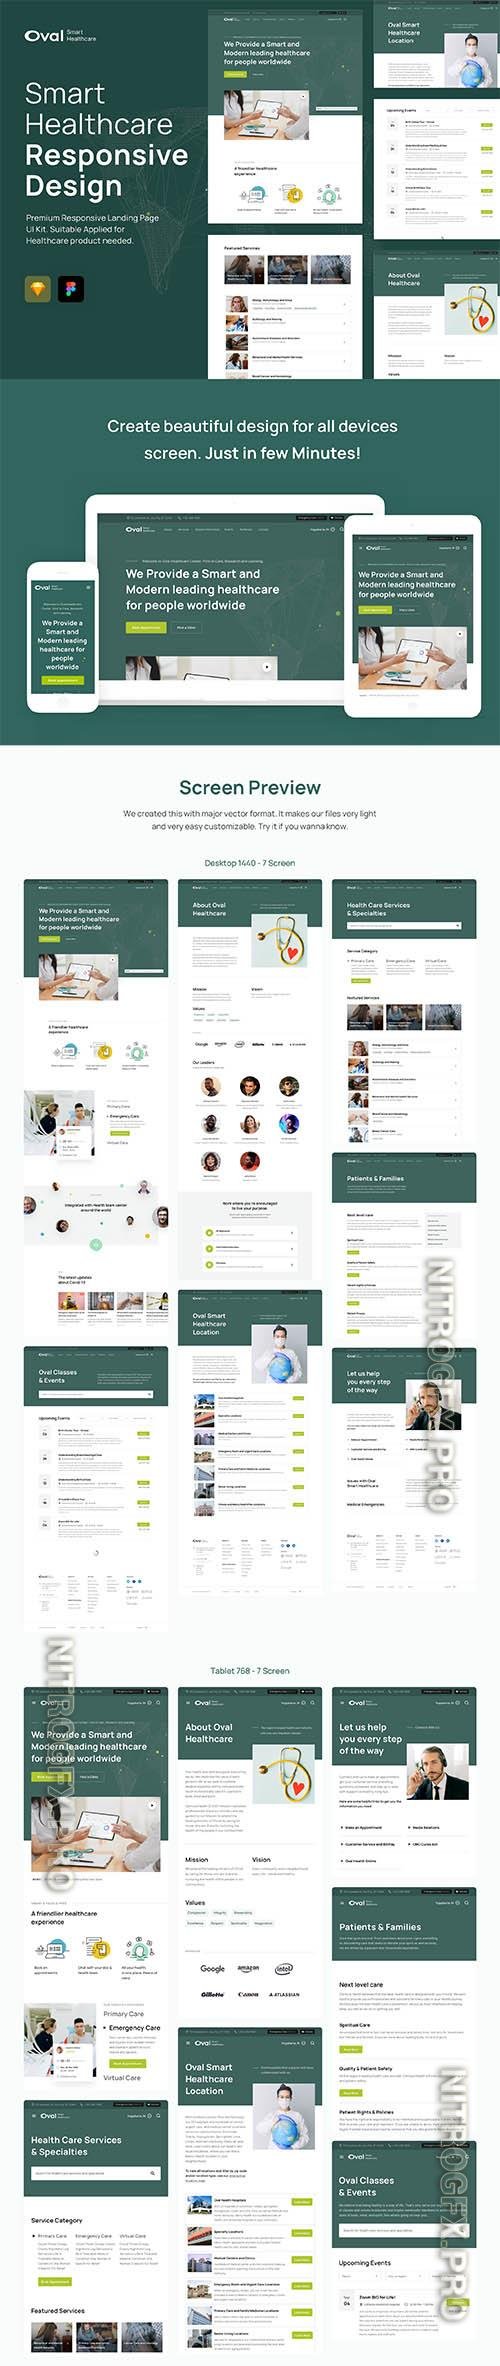 UI8 - Oval: Healthcare Landing Page Template